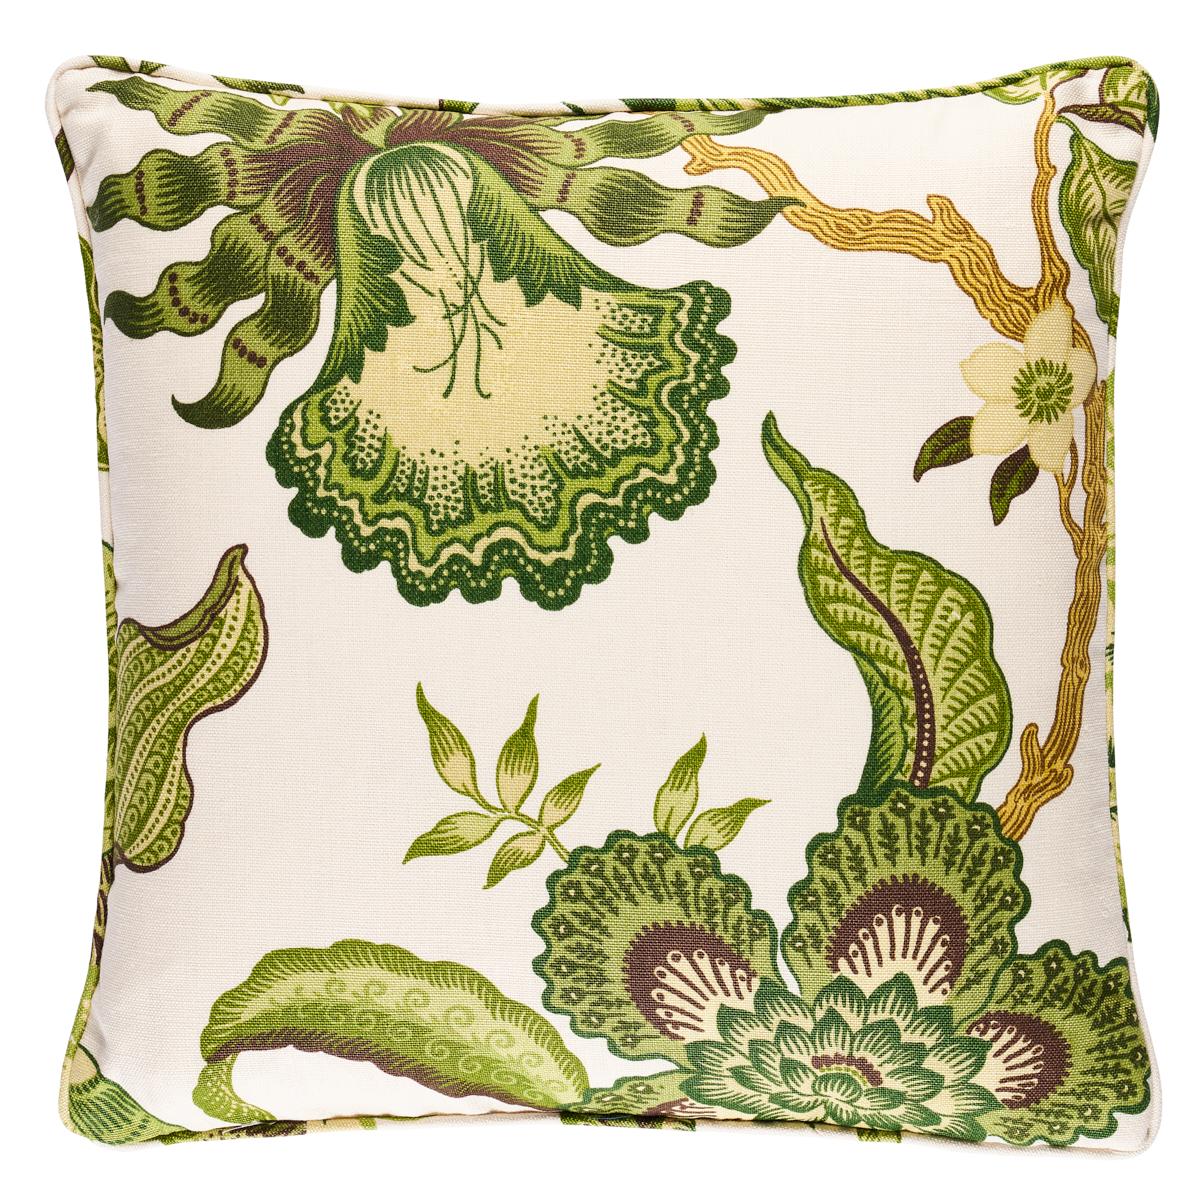 This pillow features Hothouse Flowers by Celerie Kemble for Schumacher with a self welt finish. A classic tree of life pattern with a twist. The dramatically scaled print combines stylized exotic motifs with an au courant palette. Pillow includes a